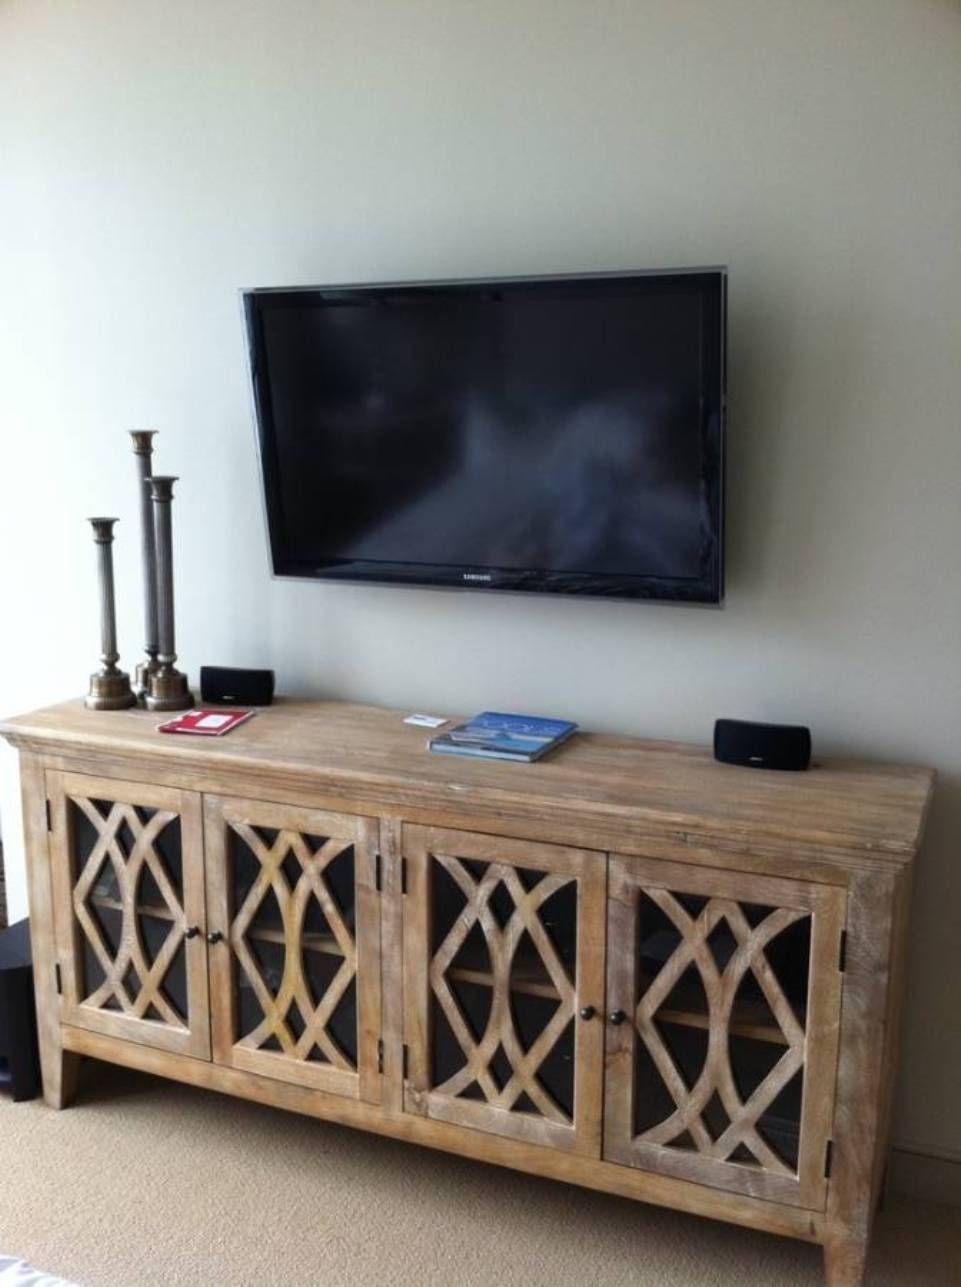 Wall Mounted Tv Over Sideboard : Modern Wall Mounted Tv Gallery Within Solar Refinement Sideboards (View 14 of 30)